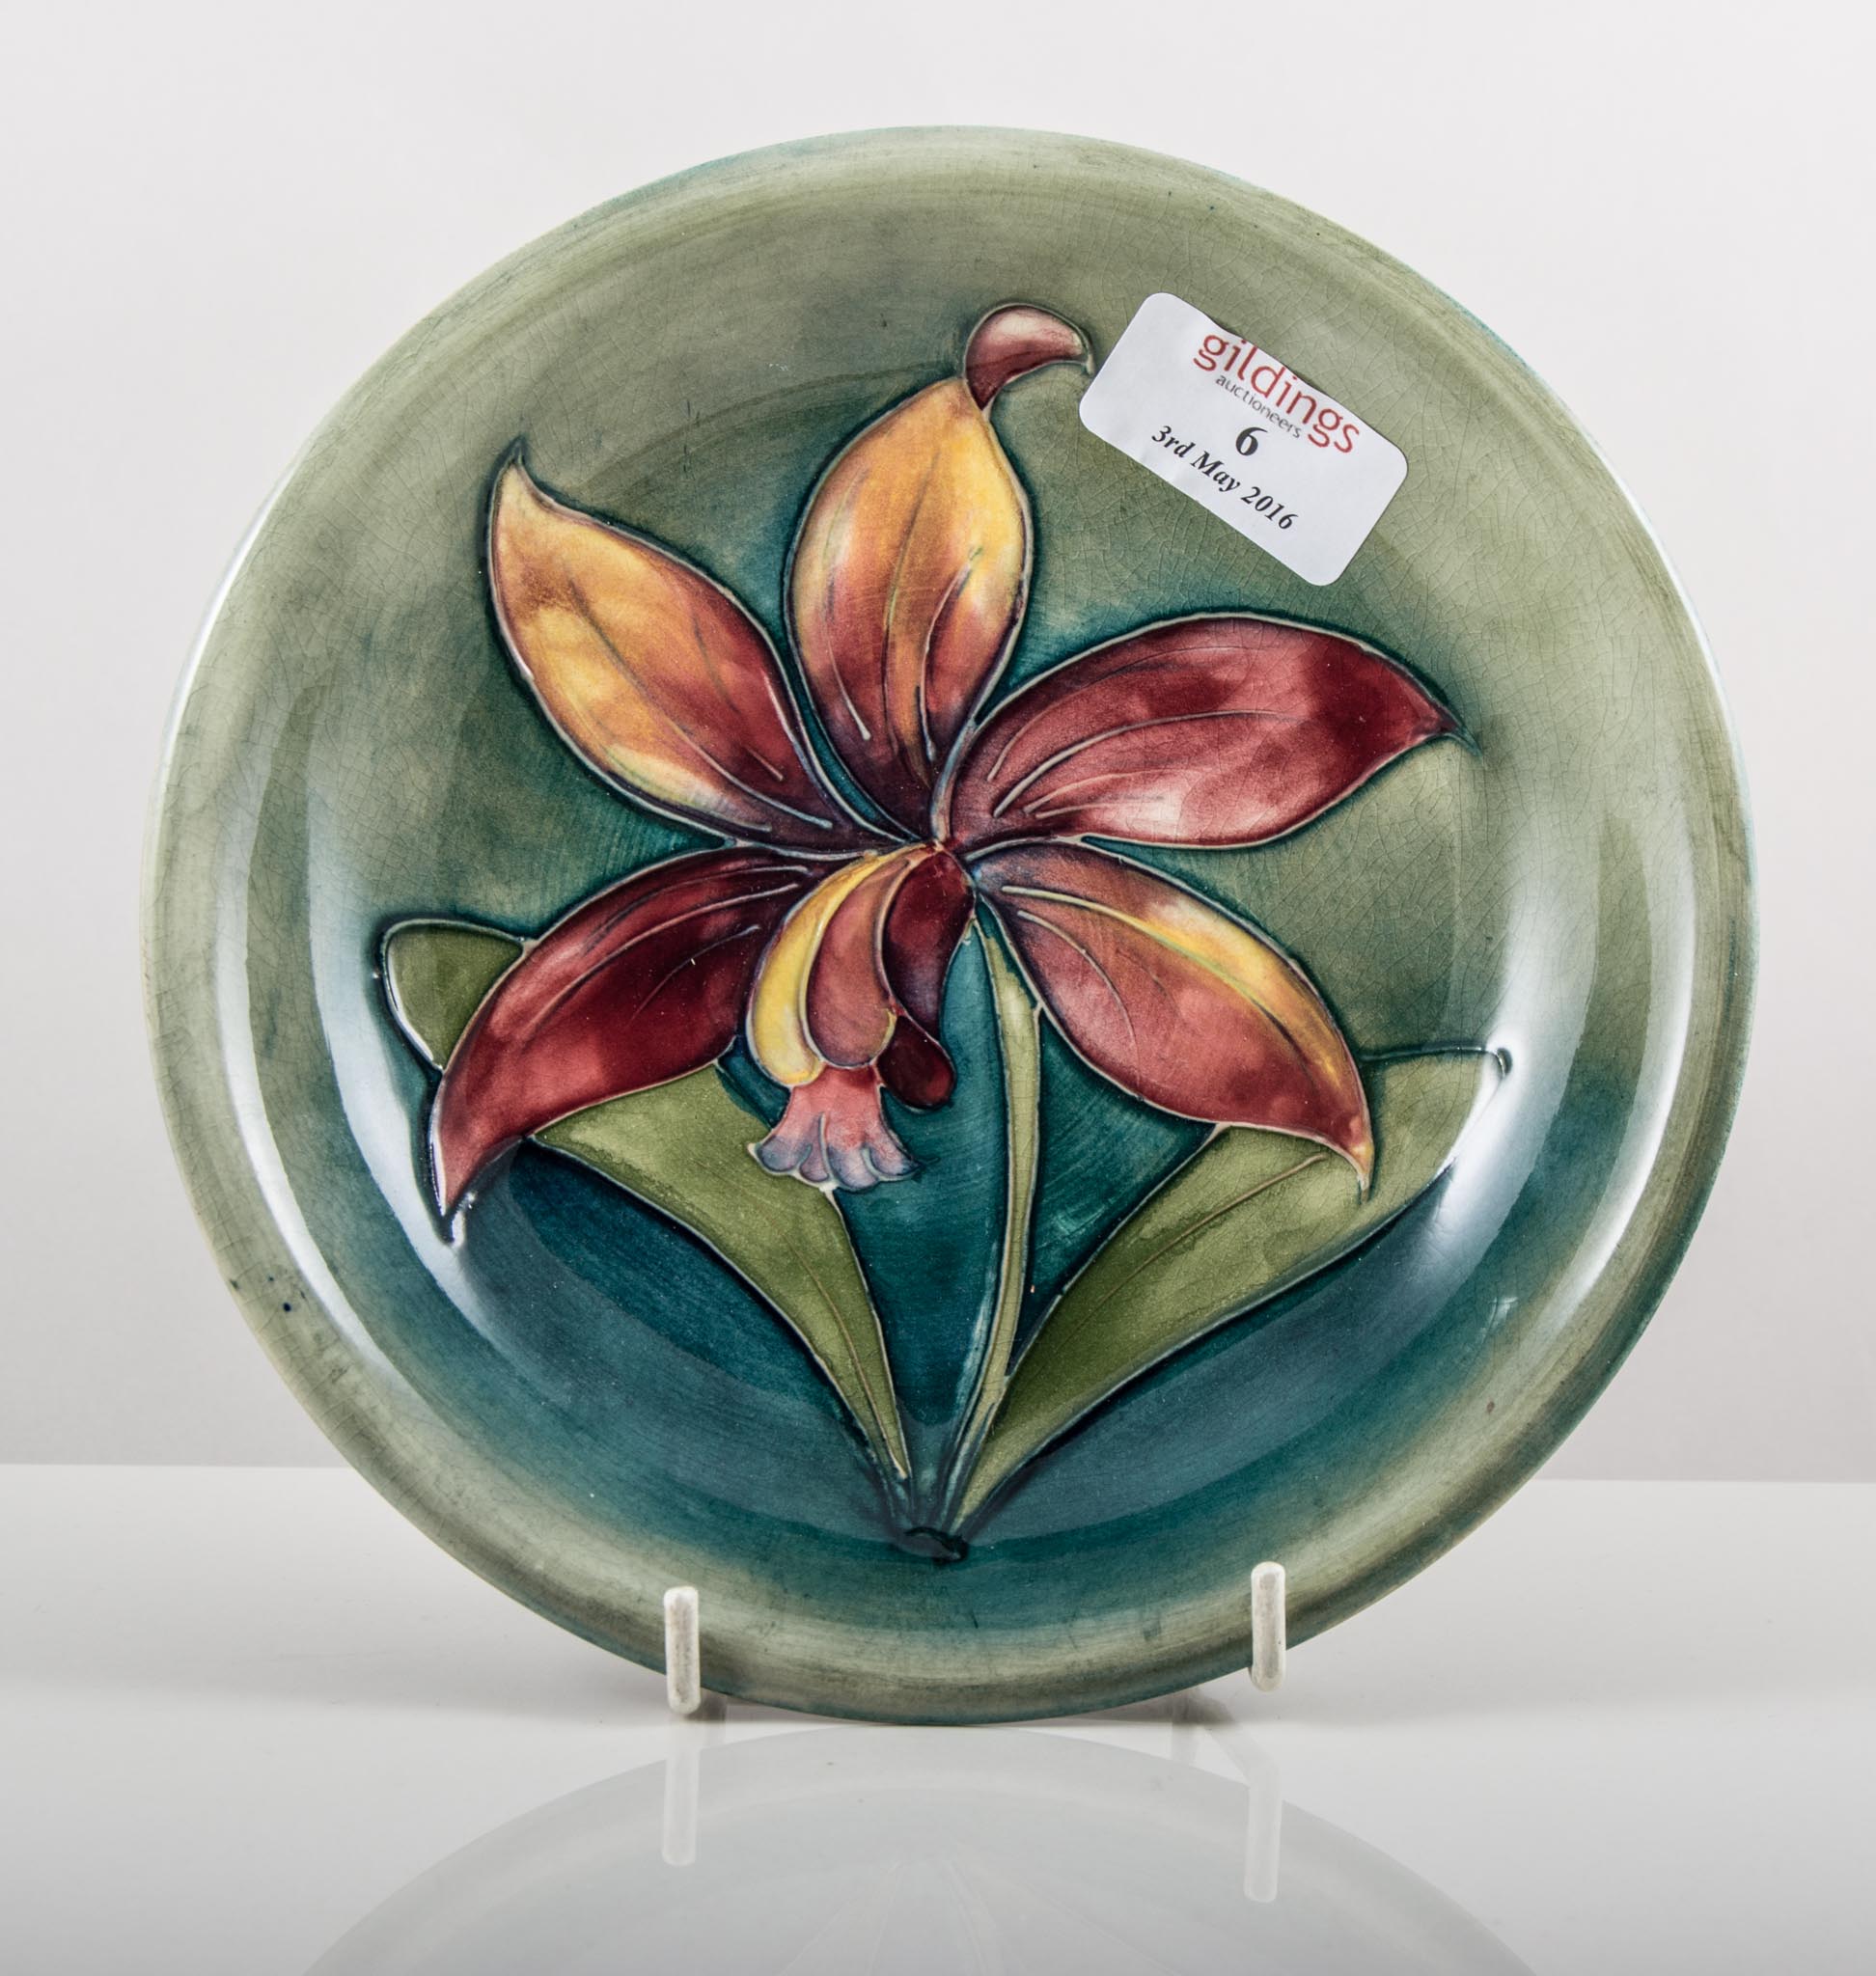 Walter Moorcroft, 'Freesia', a shallow dish/ plate, designed with a single flower, on shaded green,